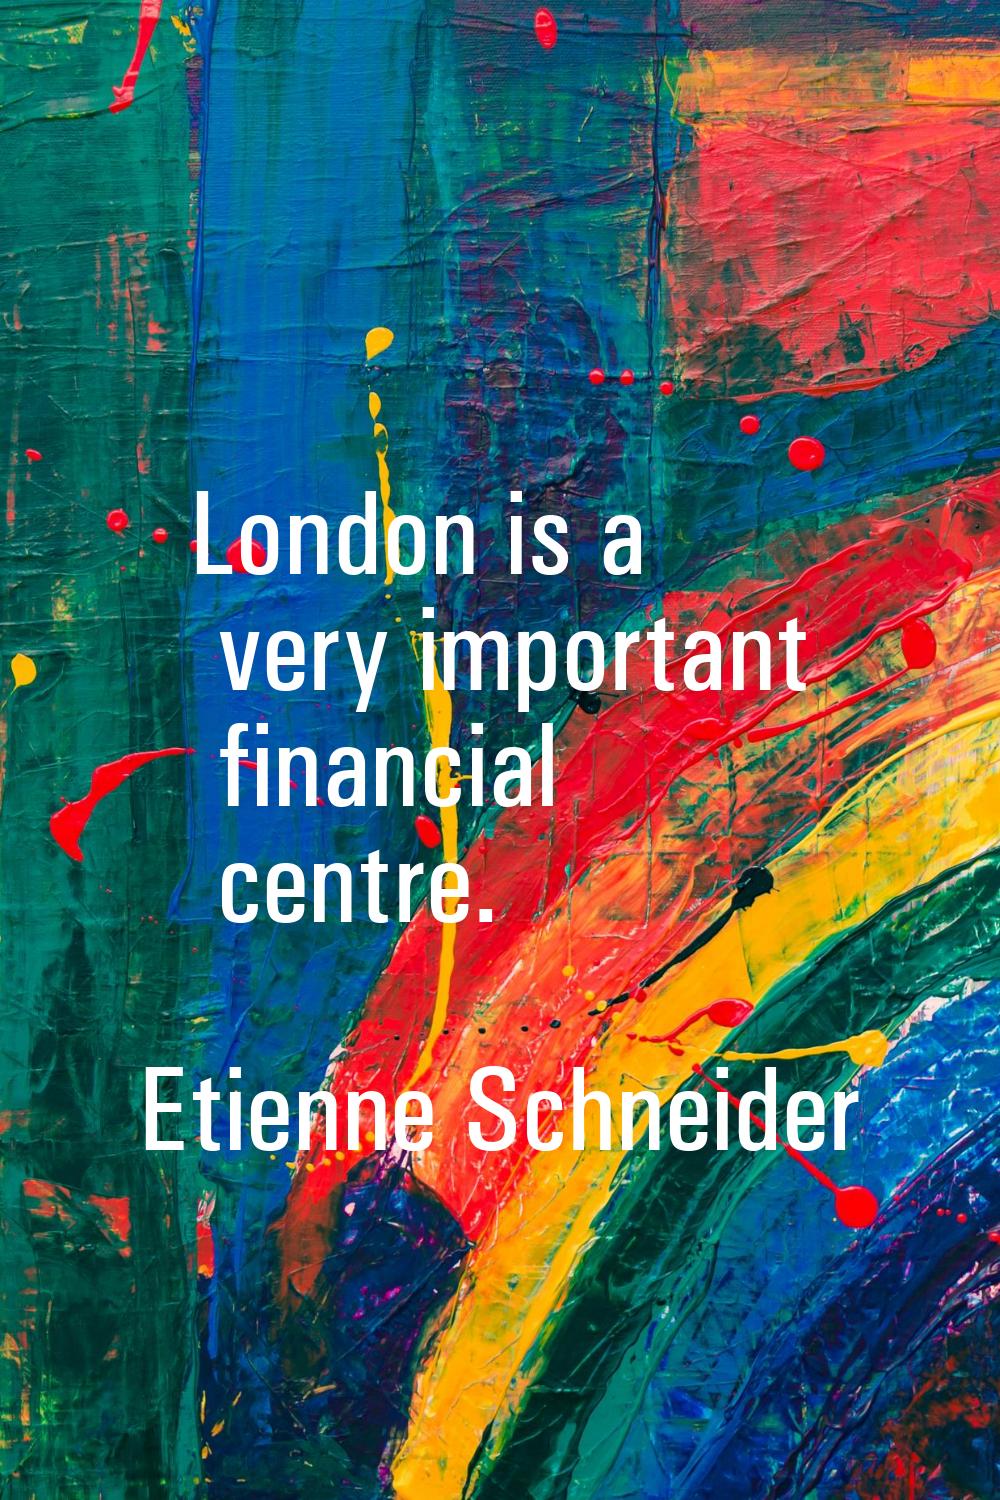 London is a very important financial centre.